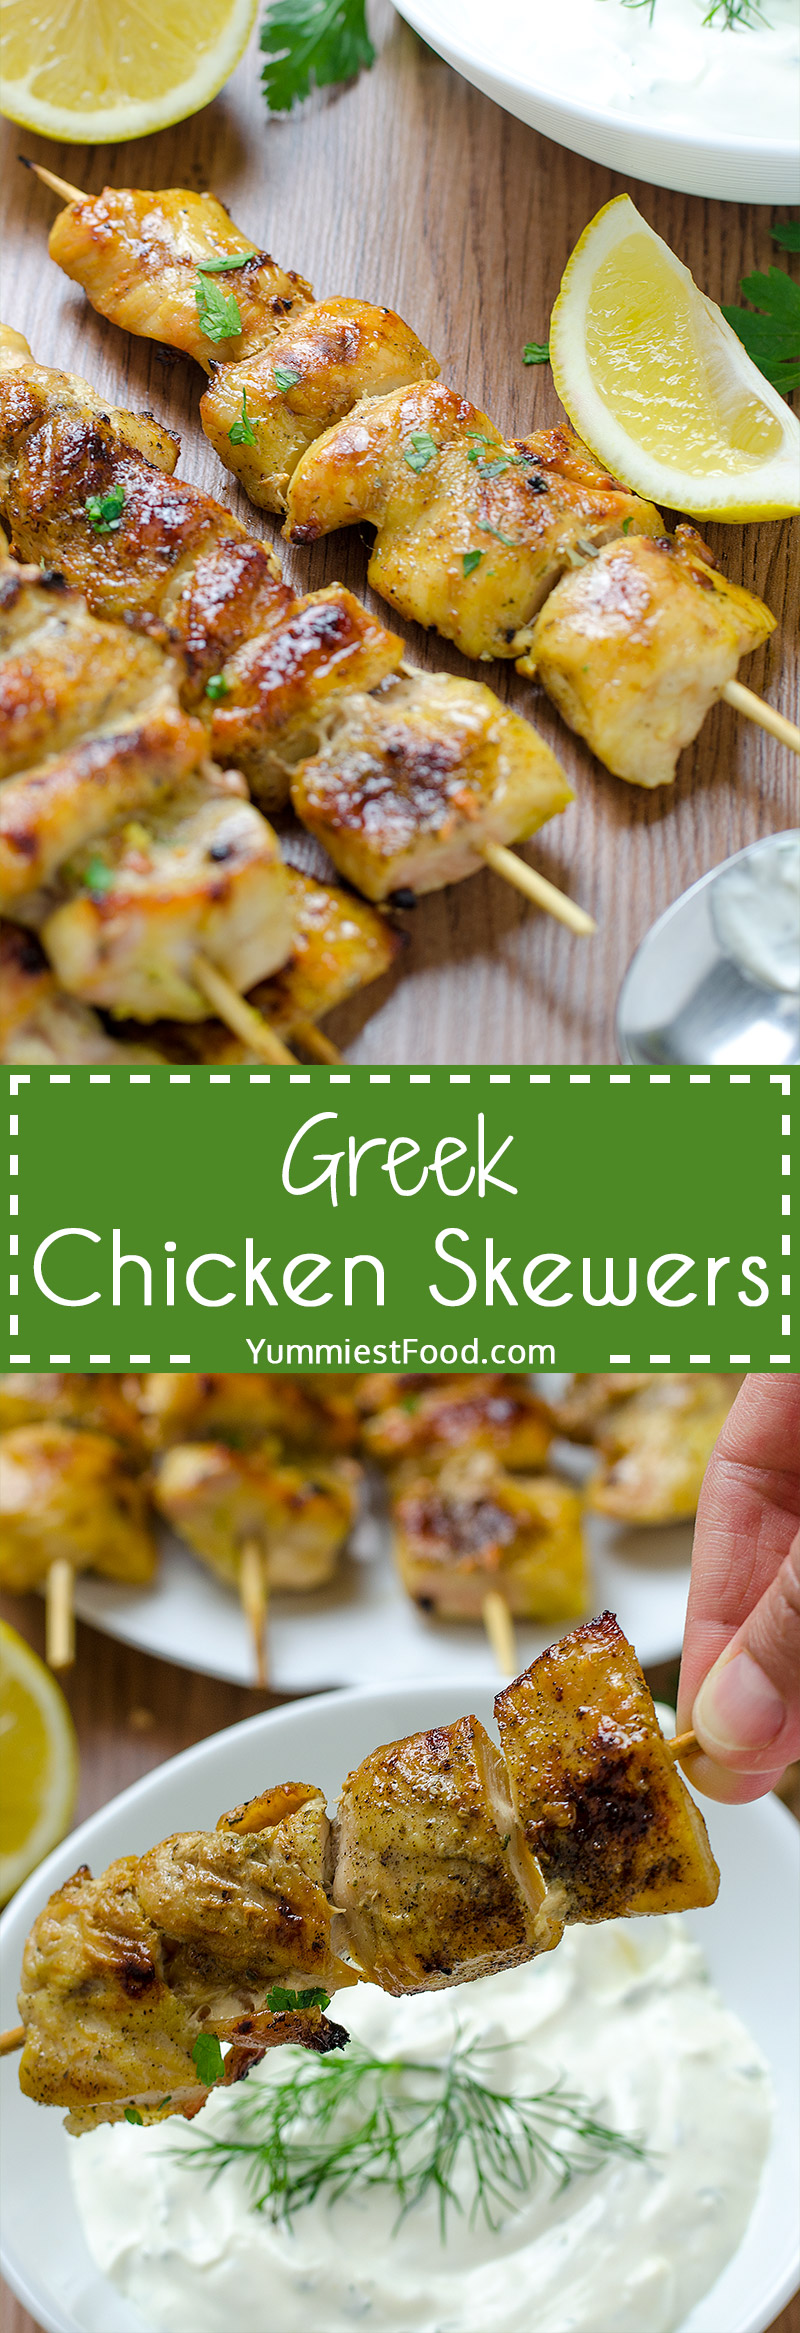 Quick and Easy Greek Chicken Skewers with Homemade Tzatziki Sauce